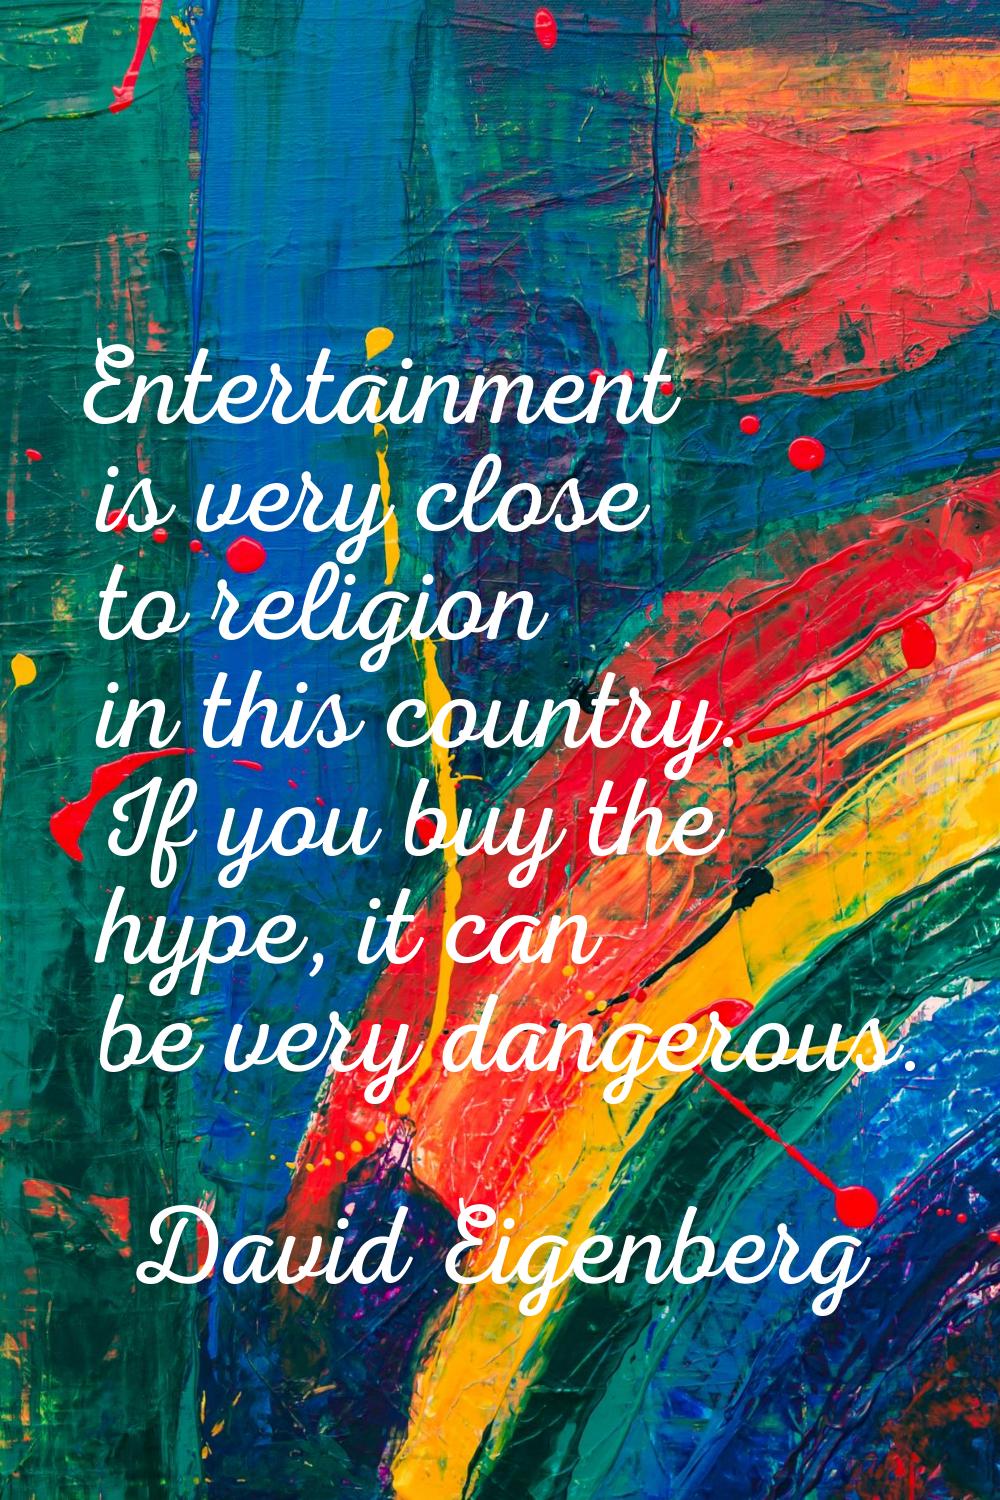 Entertainment is very close to religion in this country. If you buy the hype, it can be very danger